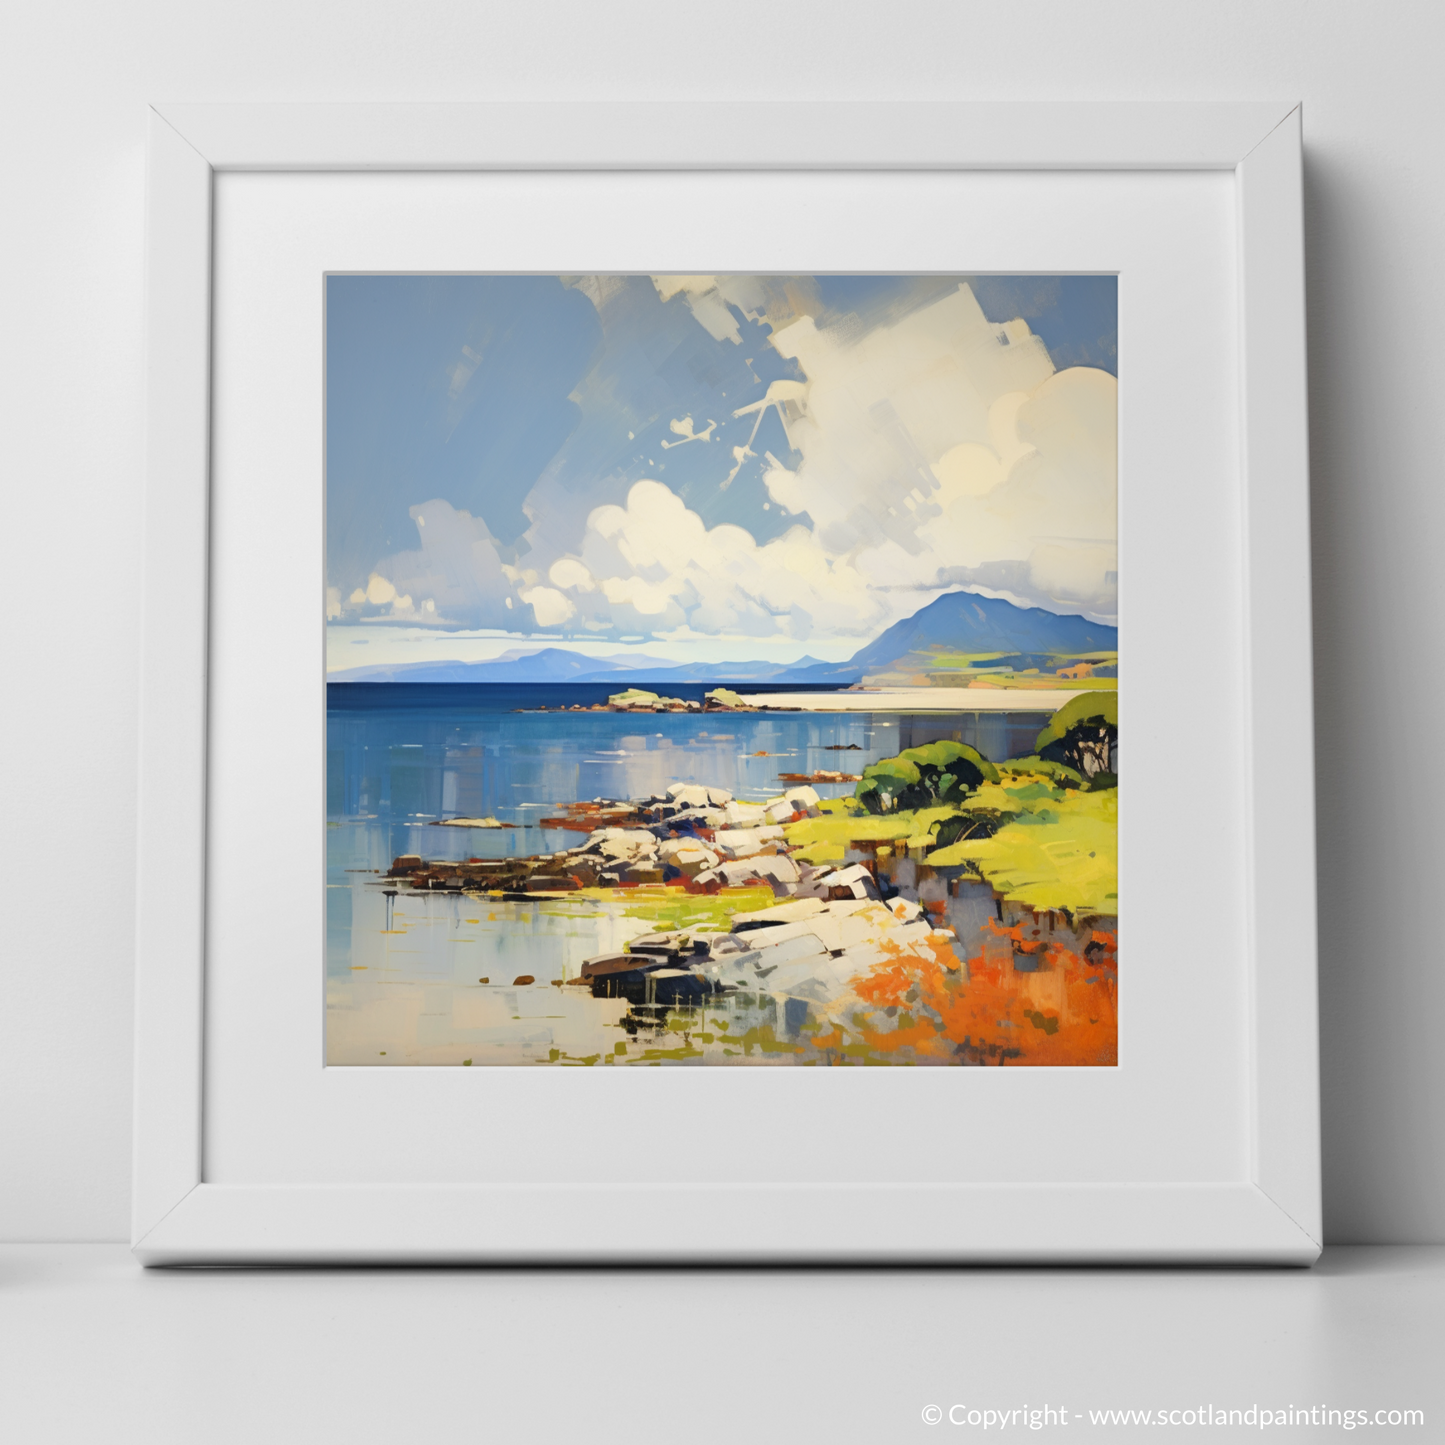 Painting and Art Print of Isle of Arran, Firth of Clyde in summer. Summer Splendour on the Isle of Arran.